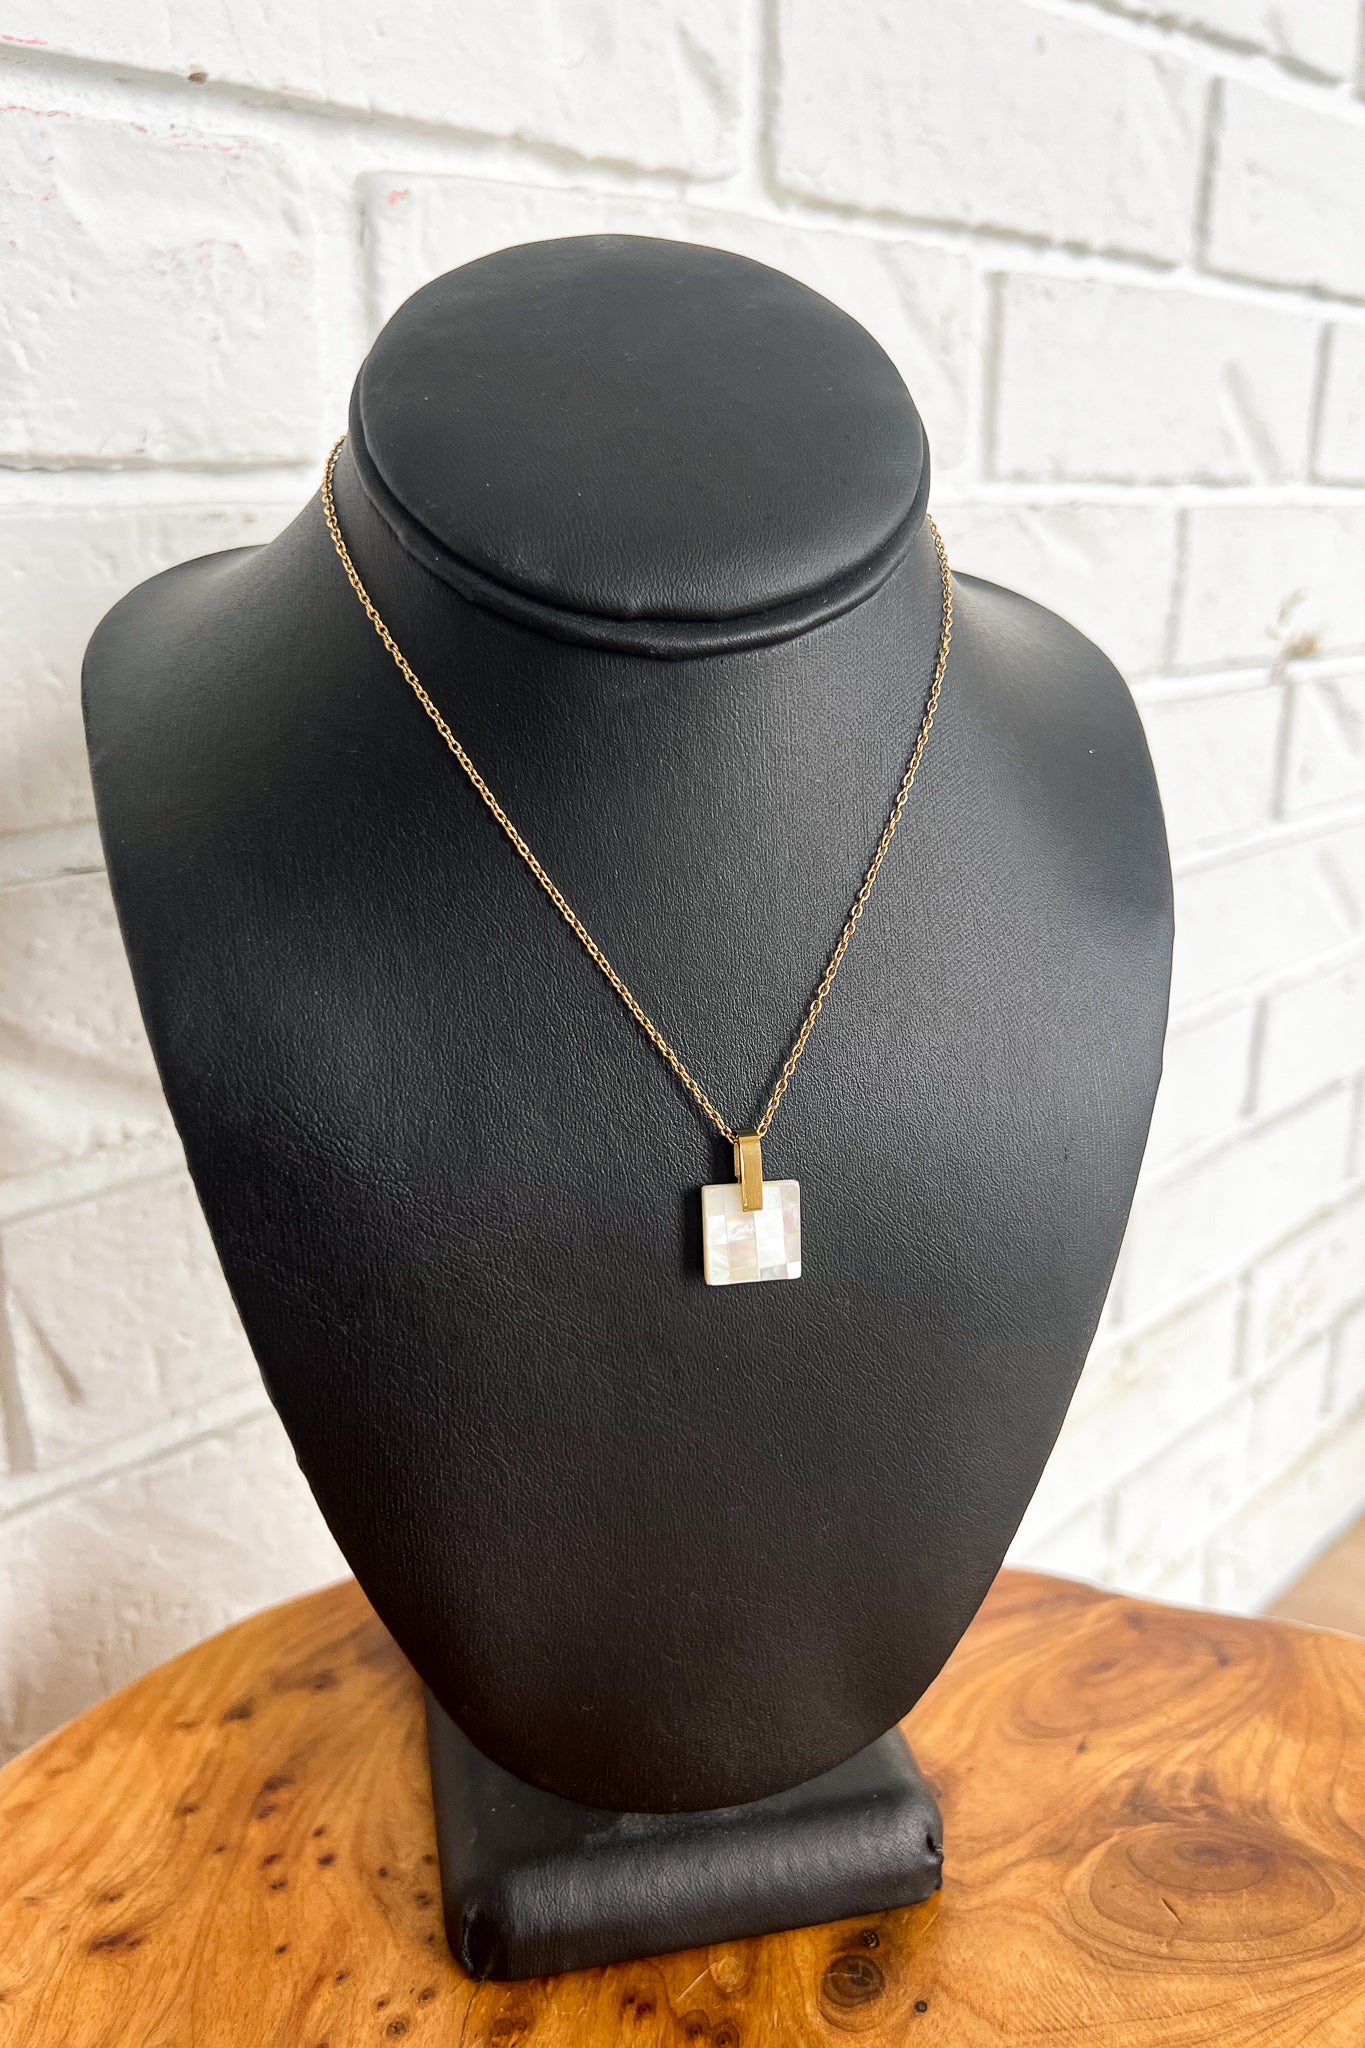 18K Pearlescent Square Pendant Necklace